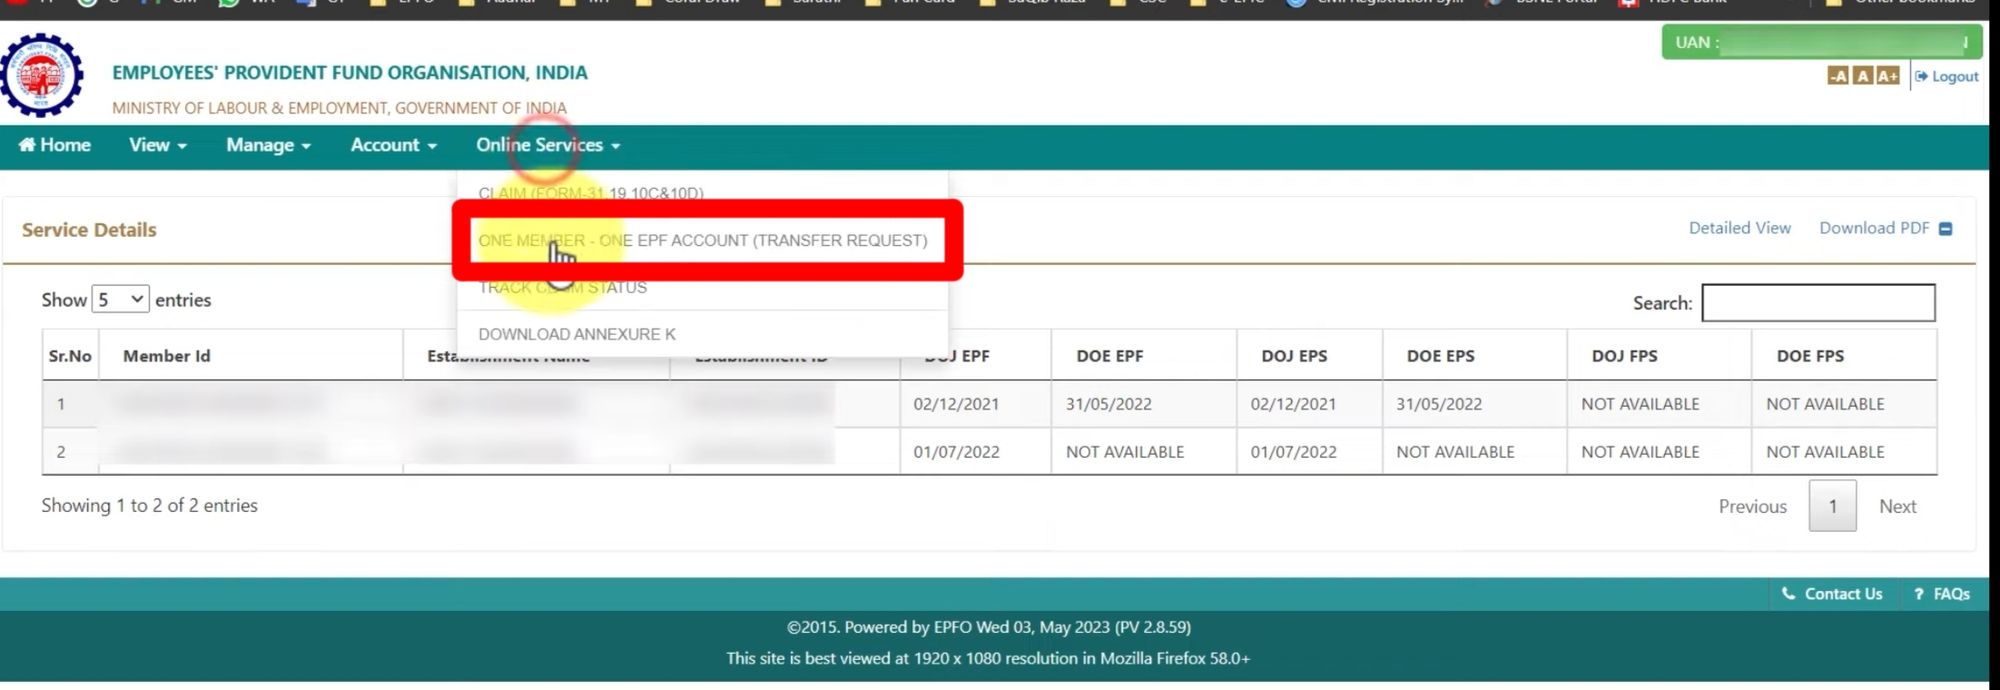 One Member – One EPF Account (Transfer Request)